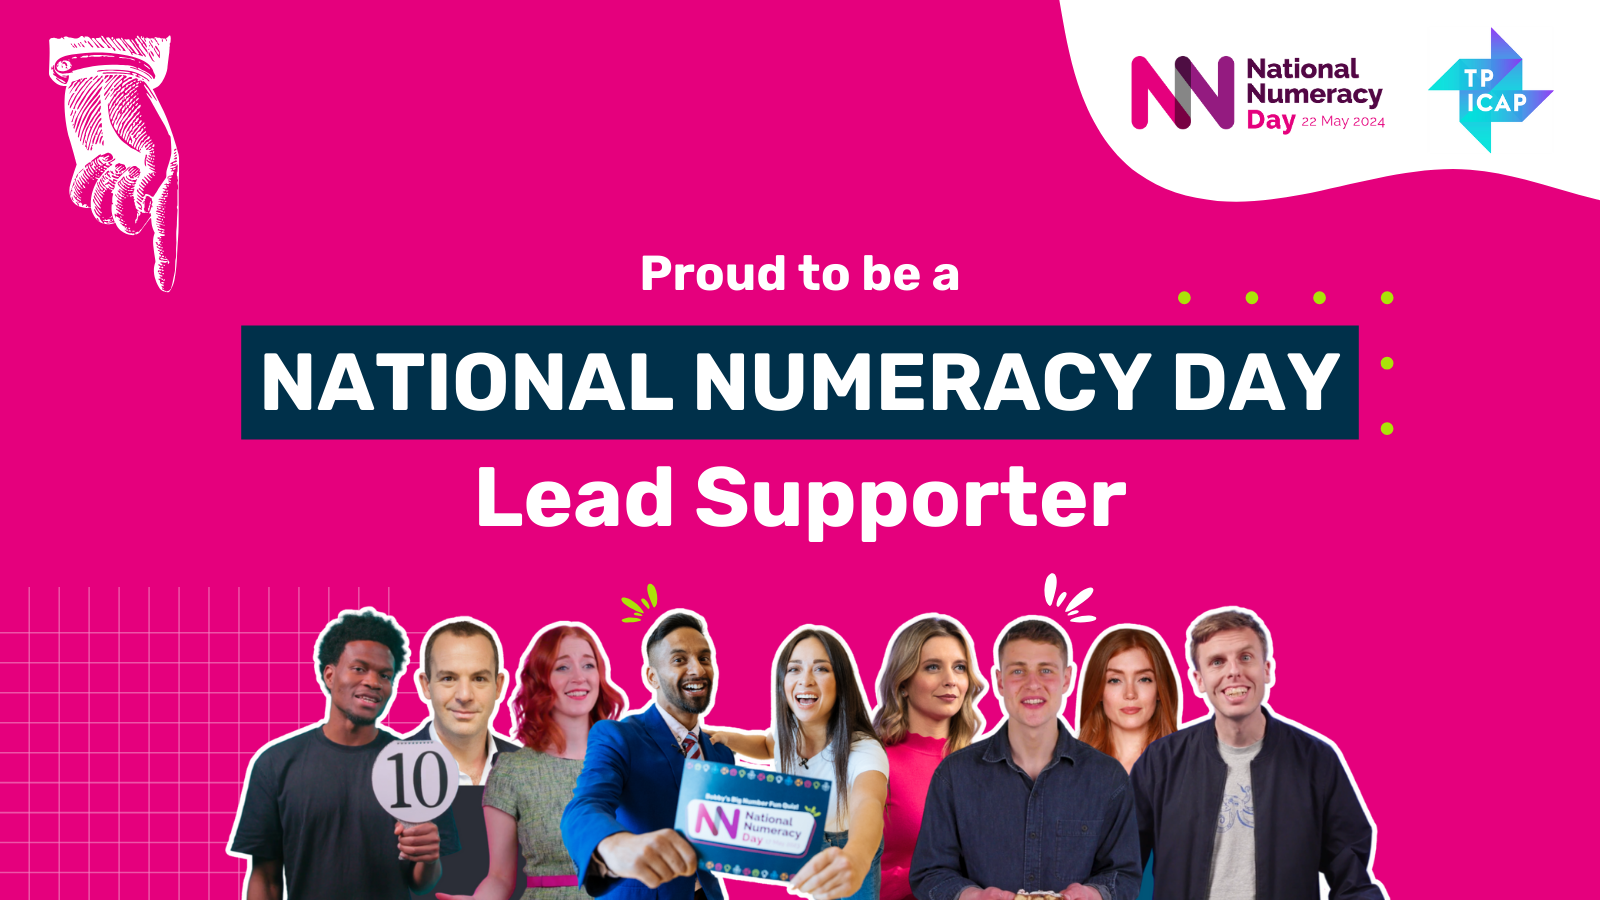 Instagram graphic saying "Proud to be a National Numeracy Day Lead Supporter"